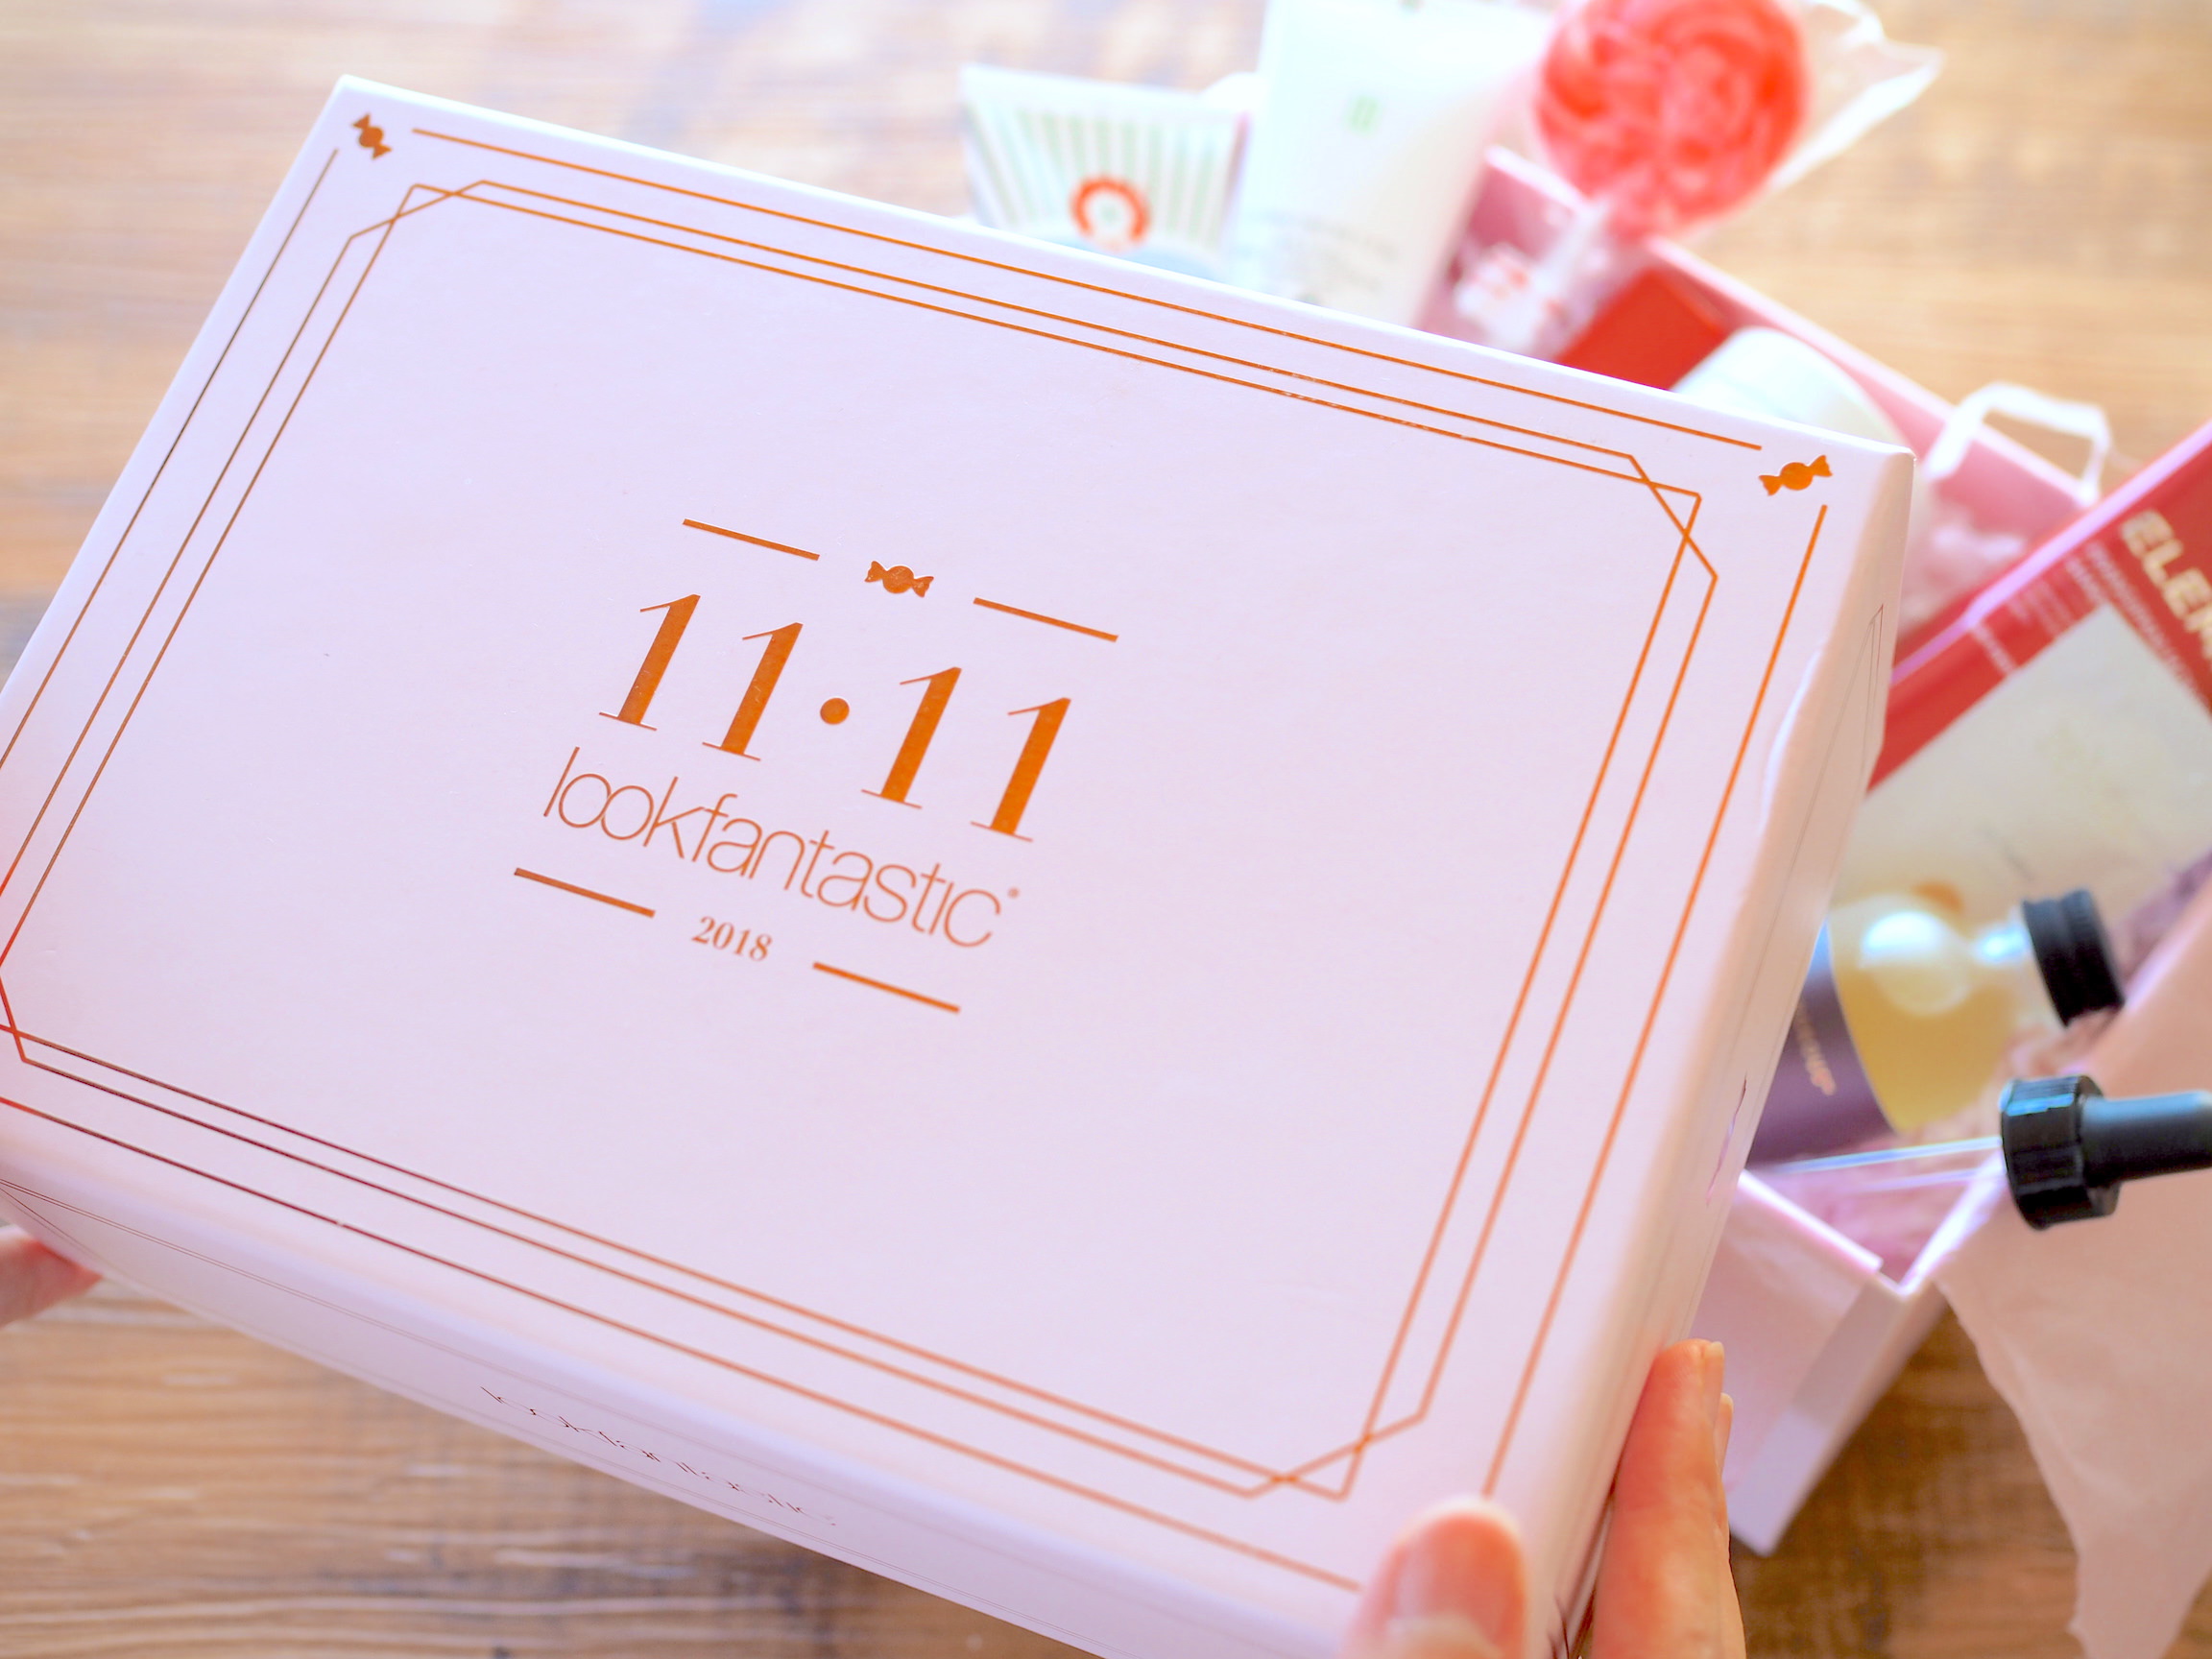 11.11 Single's Day Limited Edition Box 2018